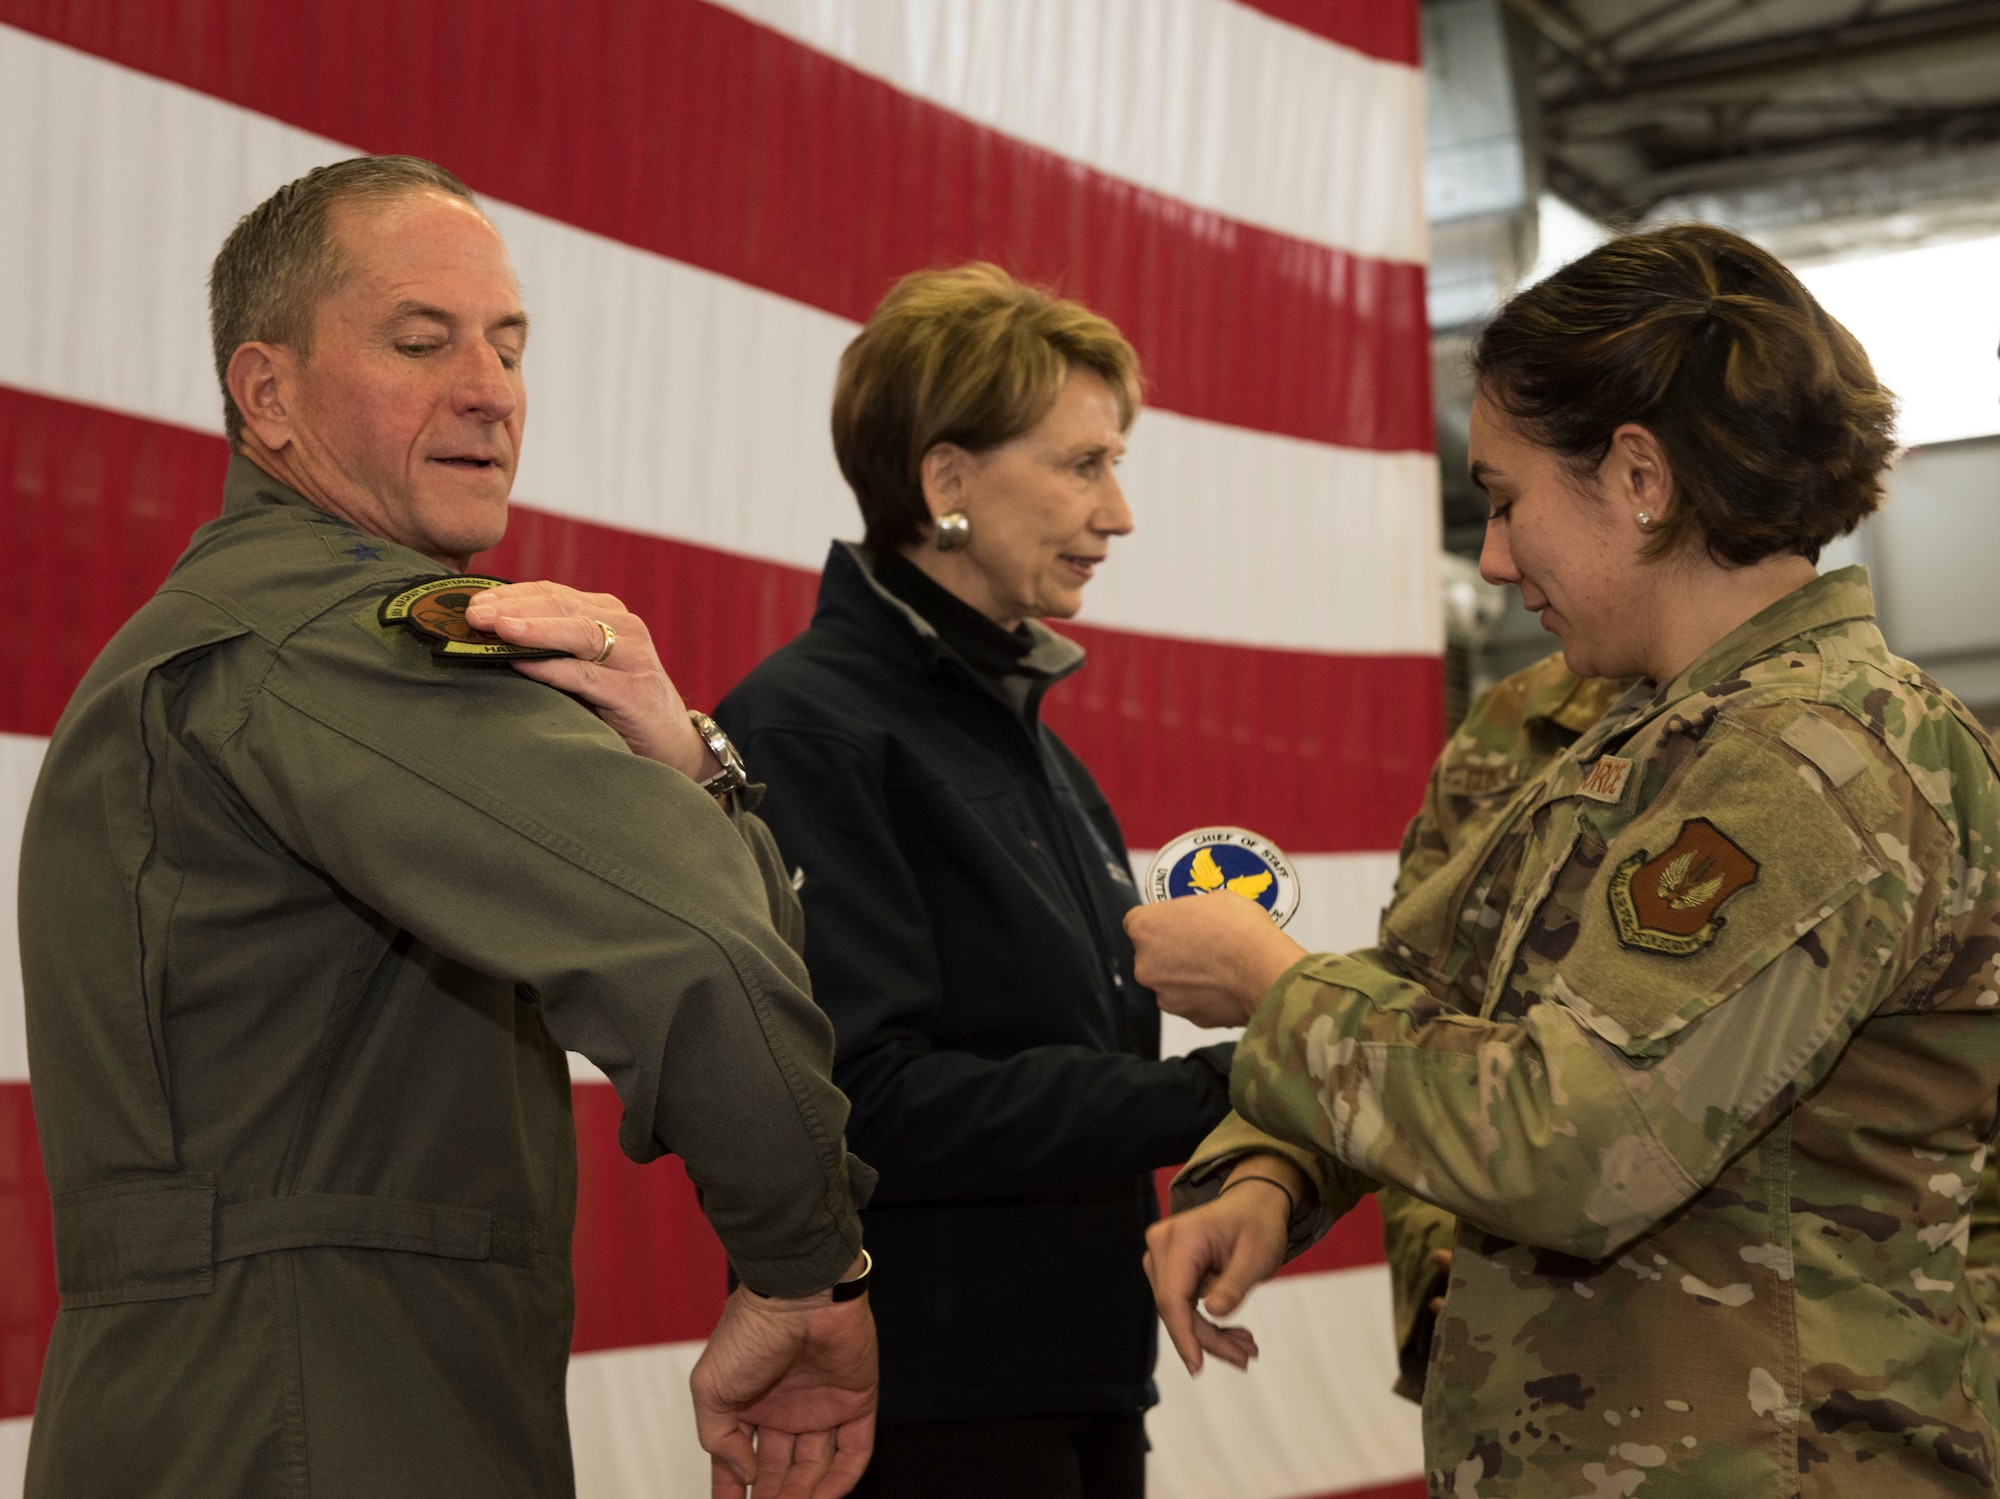 Air Force Chief of Staff Gen. David L. Goldfein trades squadron patches with an Airman after a town hall on Ramstein Air Base, Germany, Nov. 22, 2019.